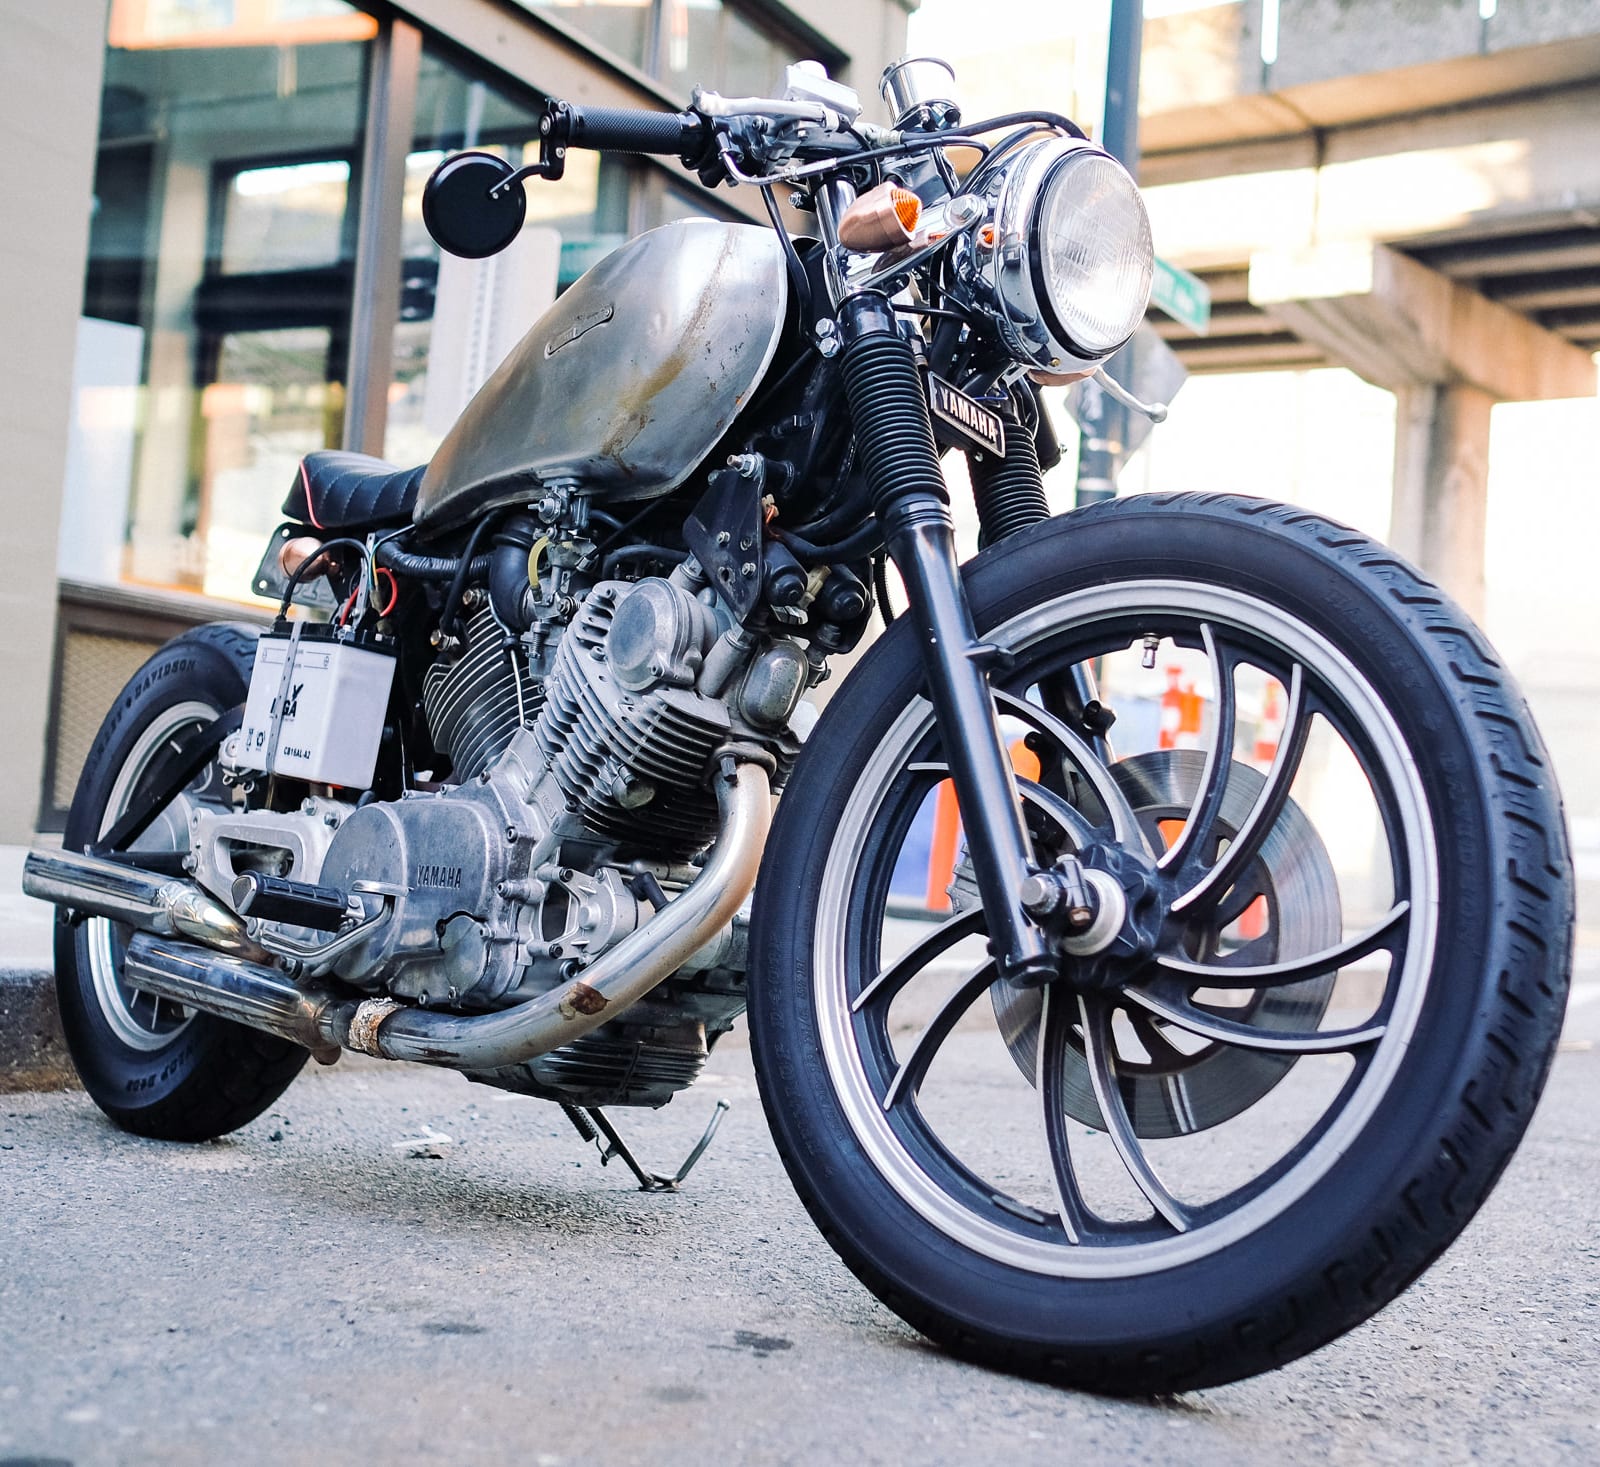 Who Has The Best Cheap Motorcycle Insurance In Arizona - Valuepenguin